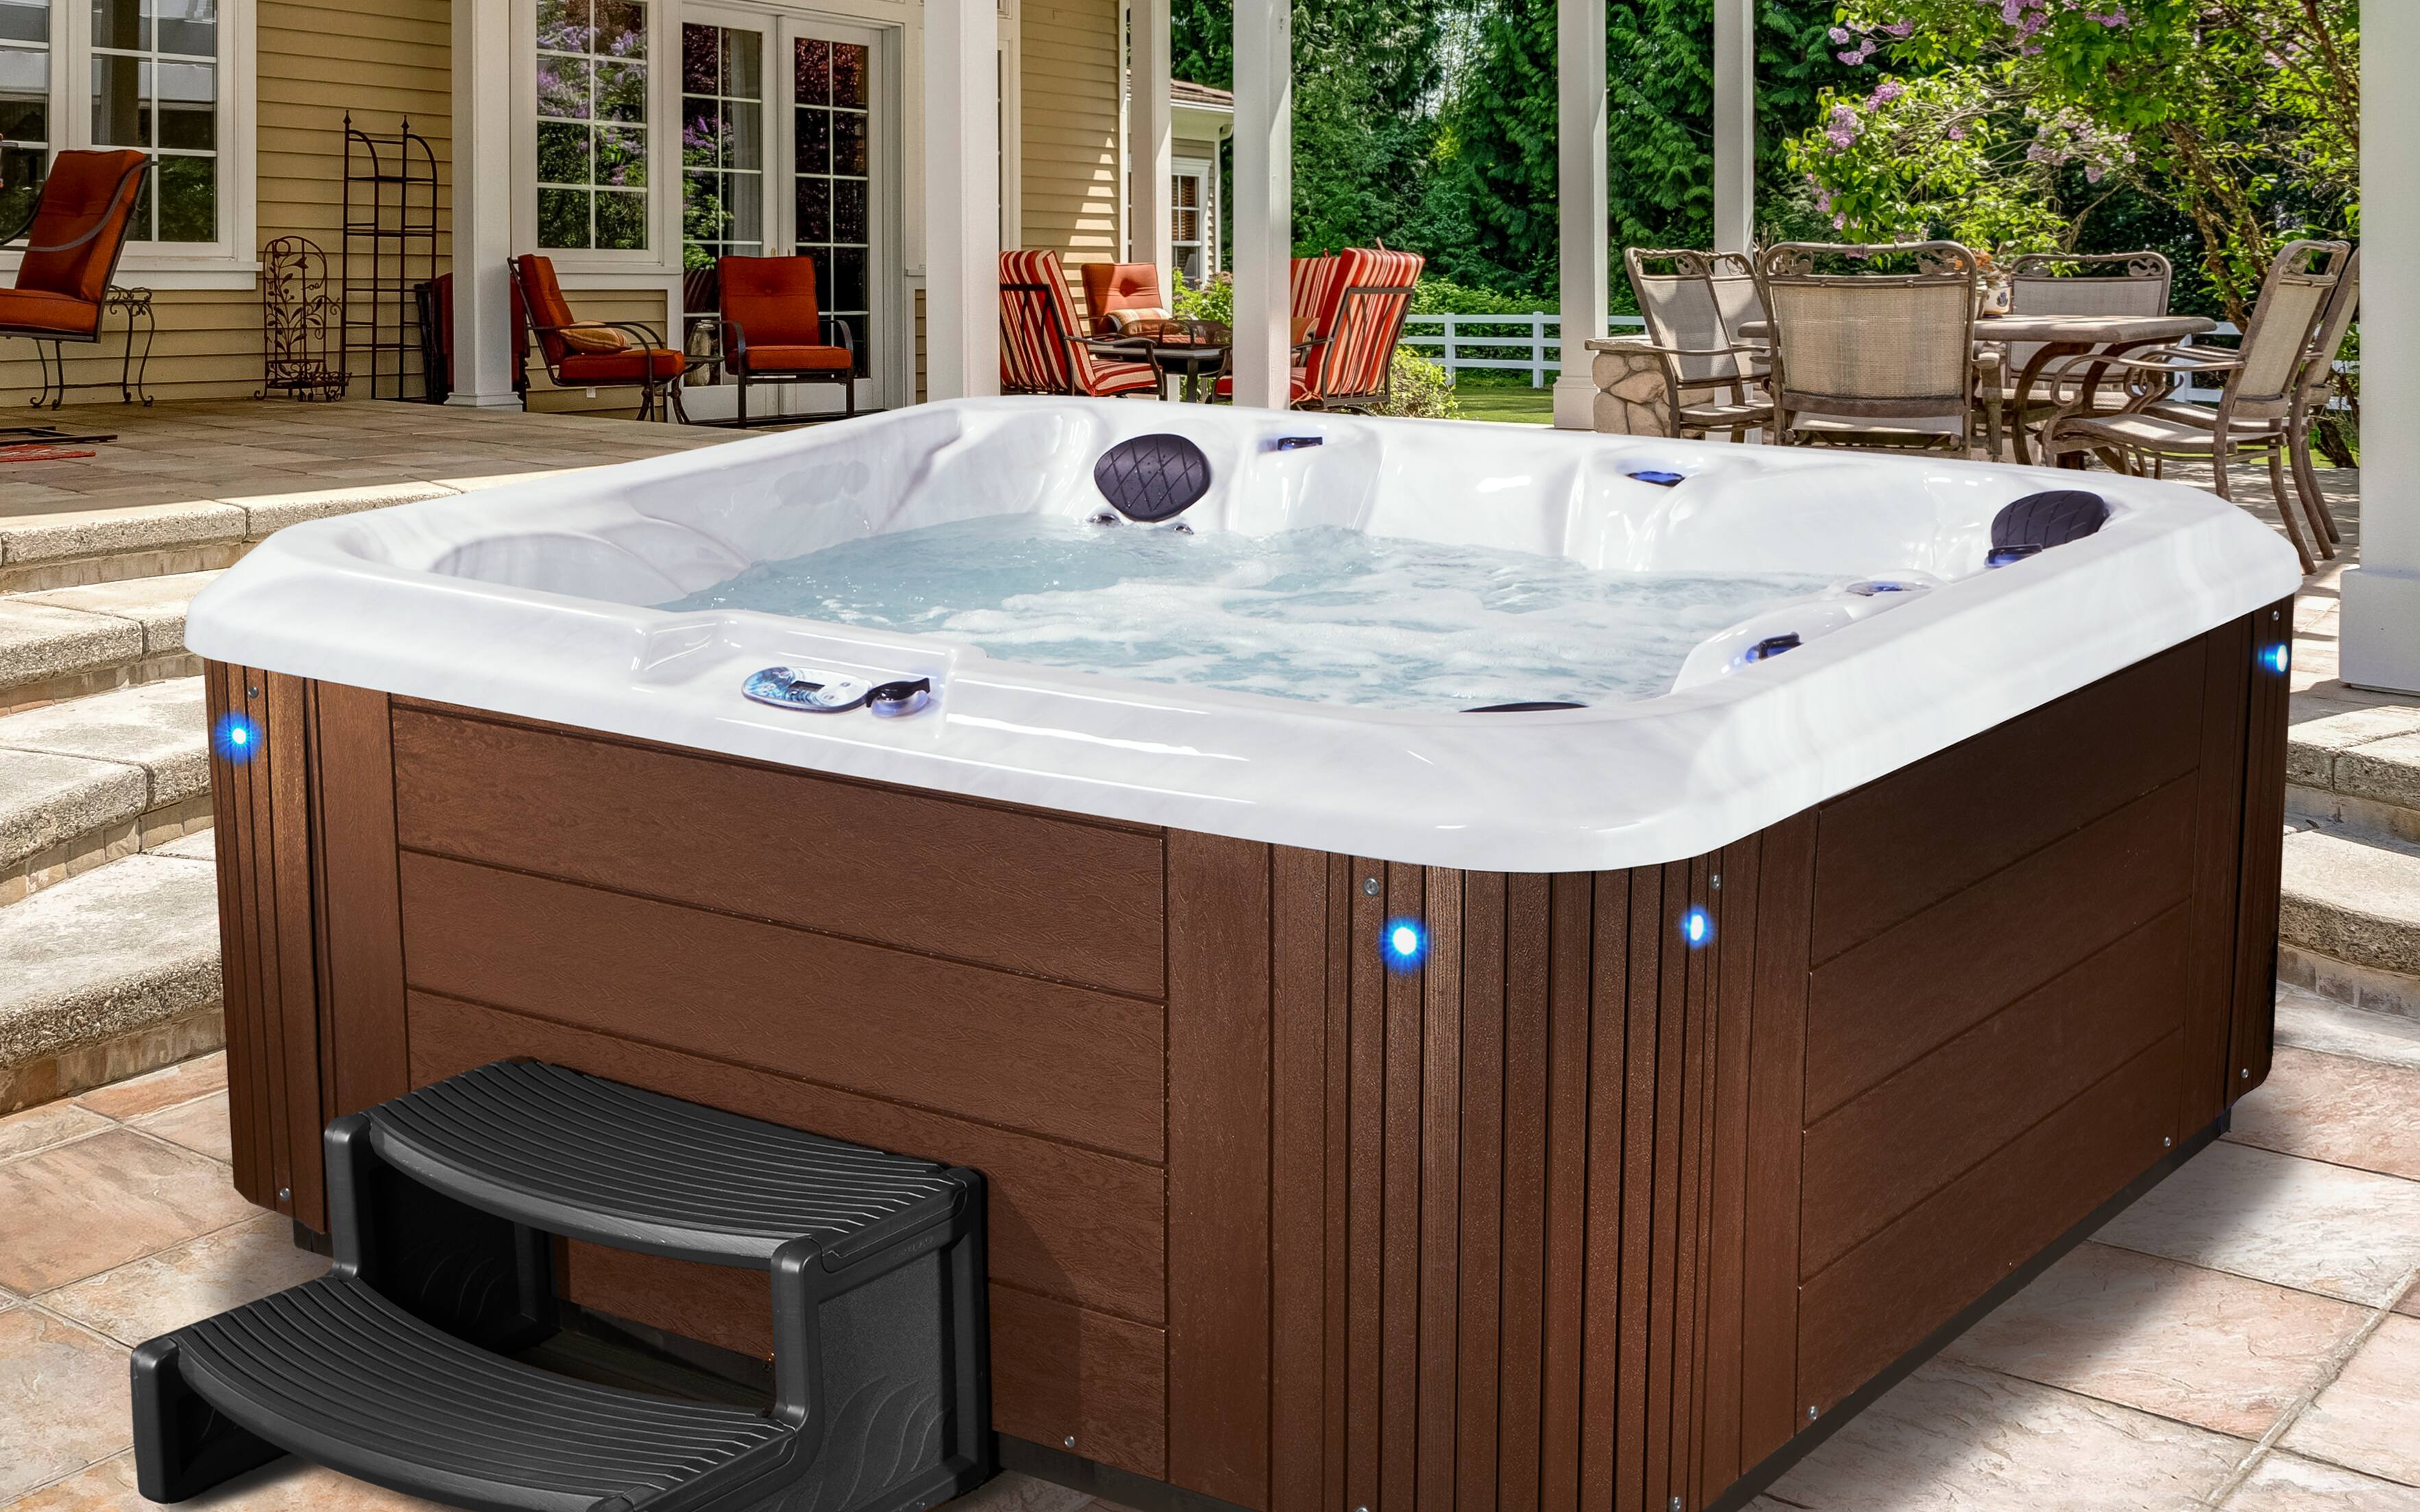 SPECIAL VALUES & SAVINGS ON HOME SPAS